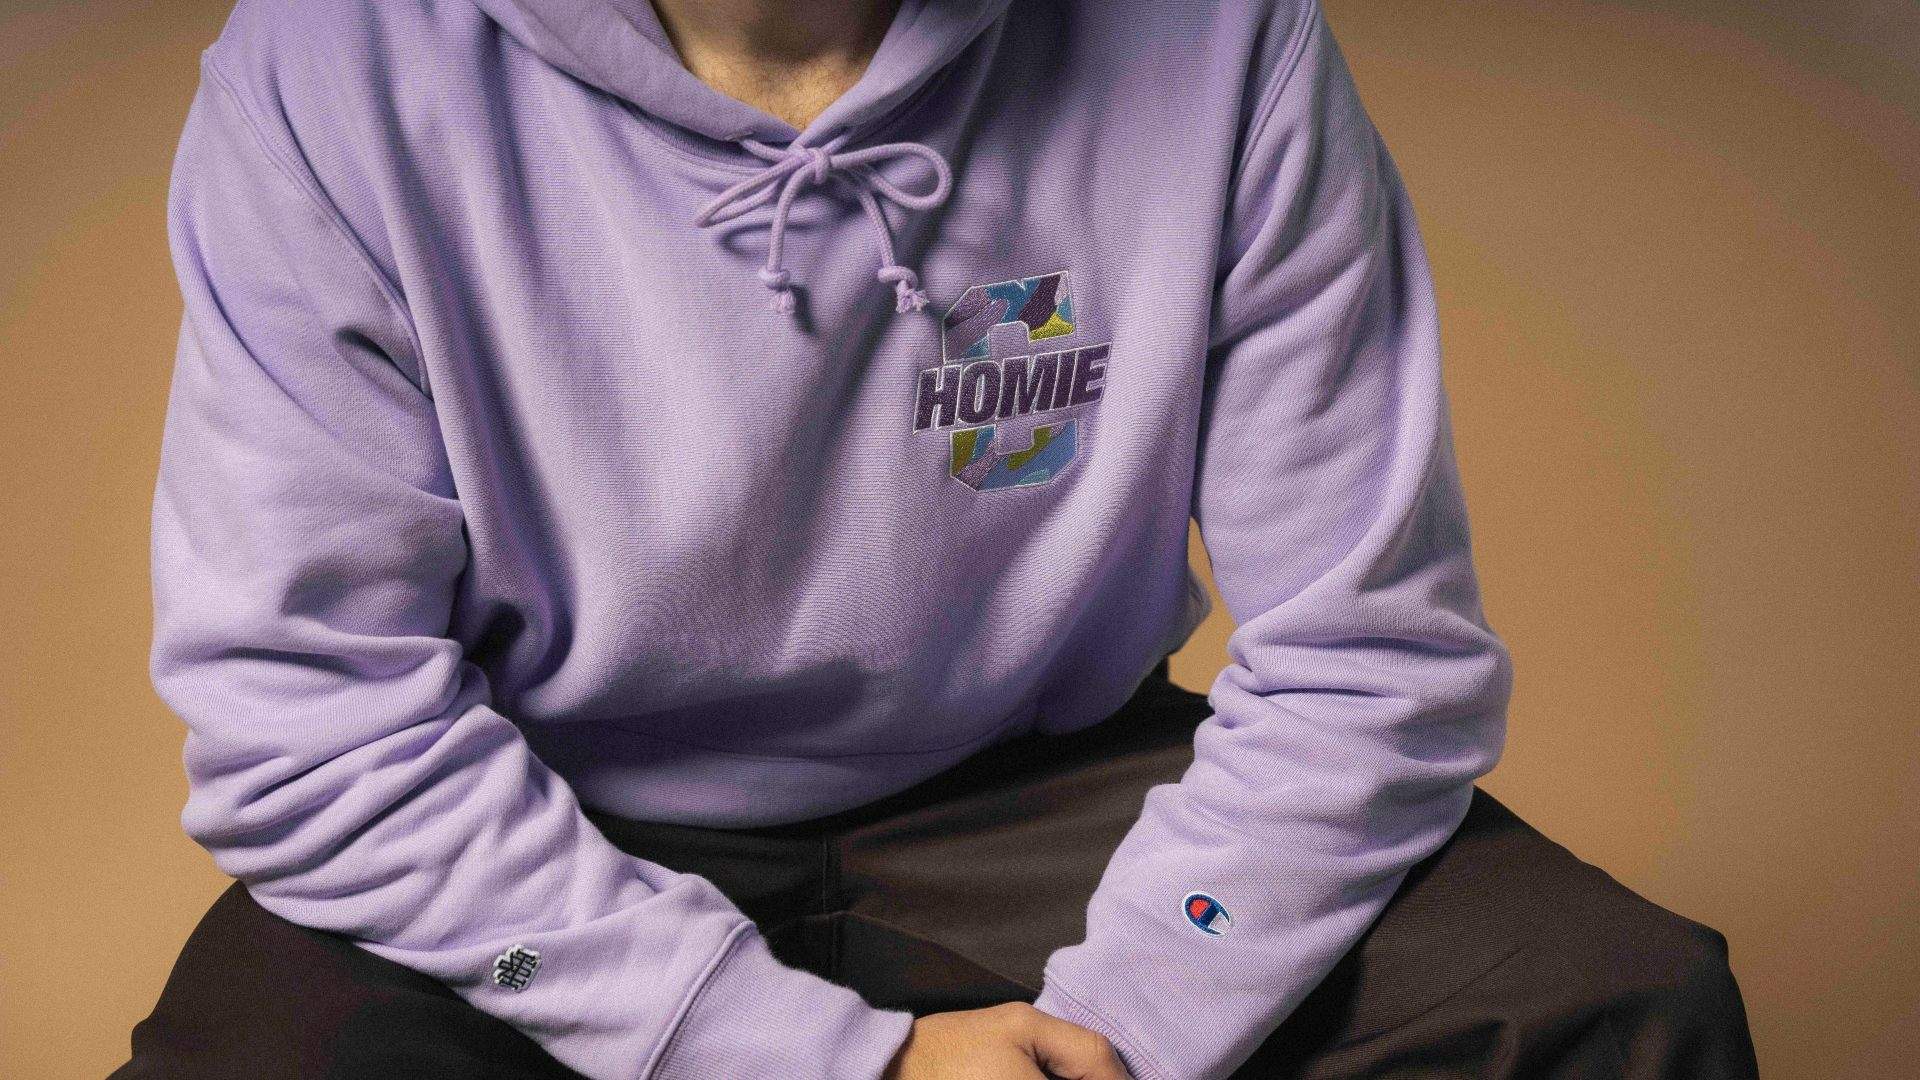 Melbourne Social Enterprise HoMie Has Just Launched a New Collection with Champion